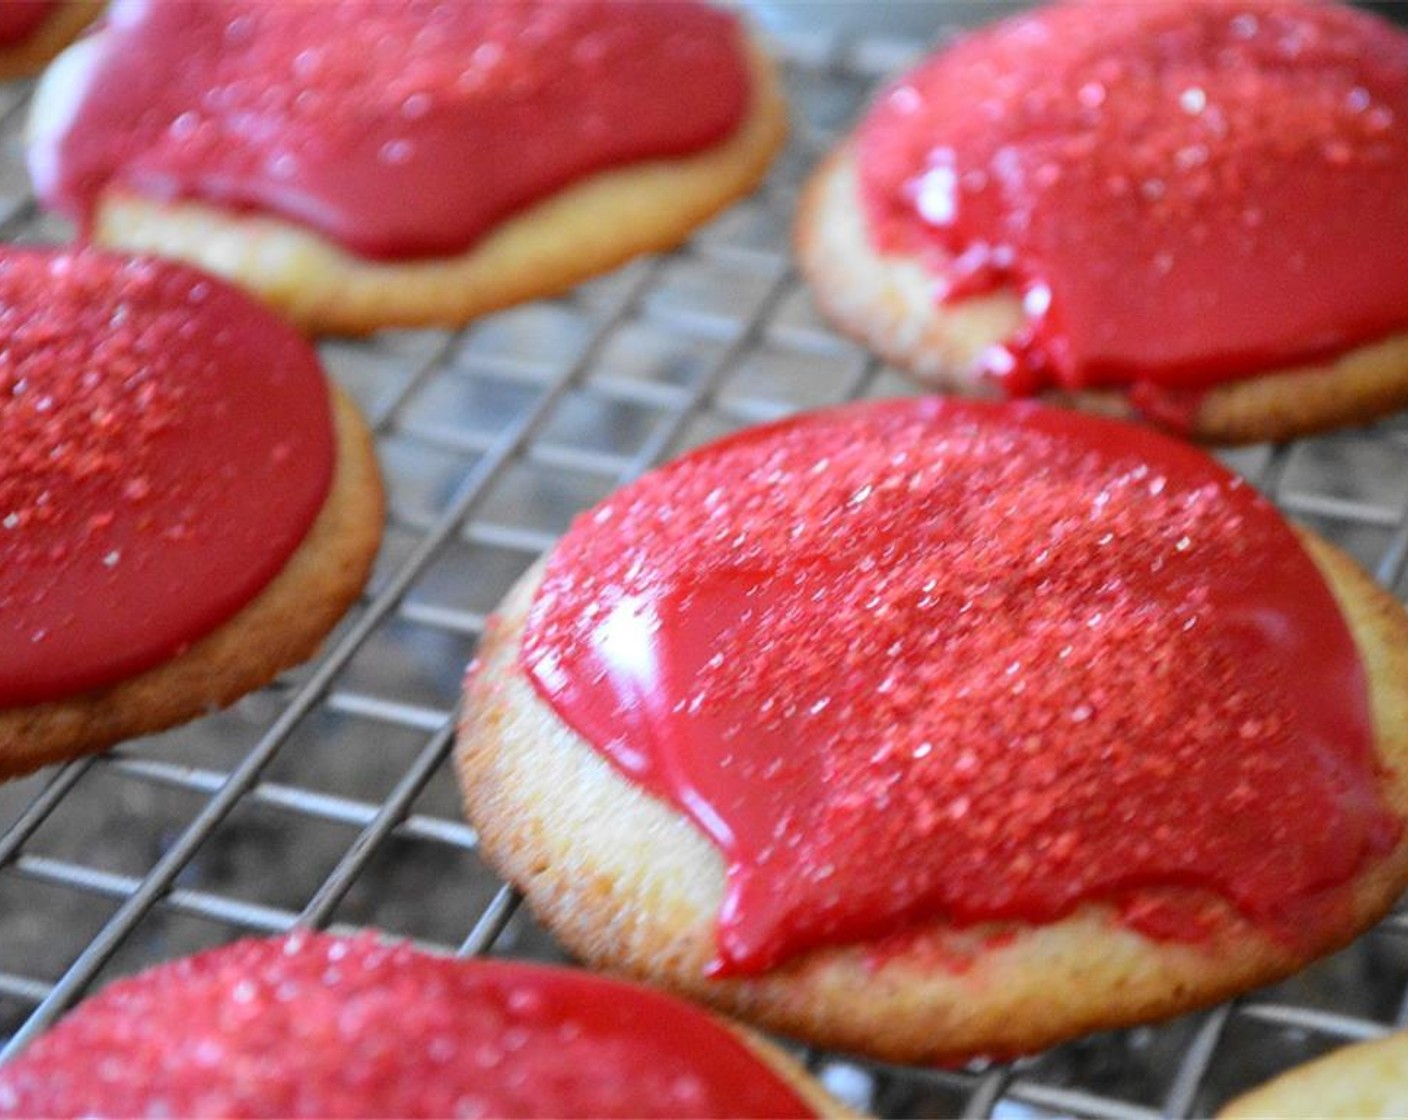 step 10 Once cooled, spread a small spoonful of the glaze over each one and sprinkle them with the Red Colored Sugar (to taste) on top before the glaze hardens completely.